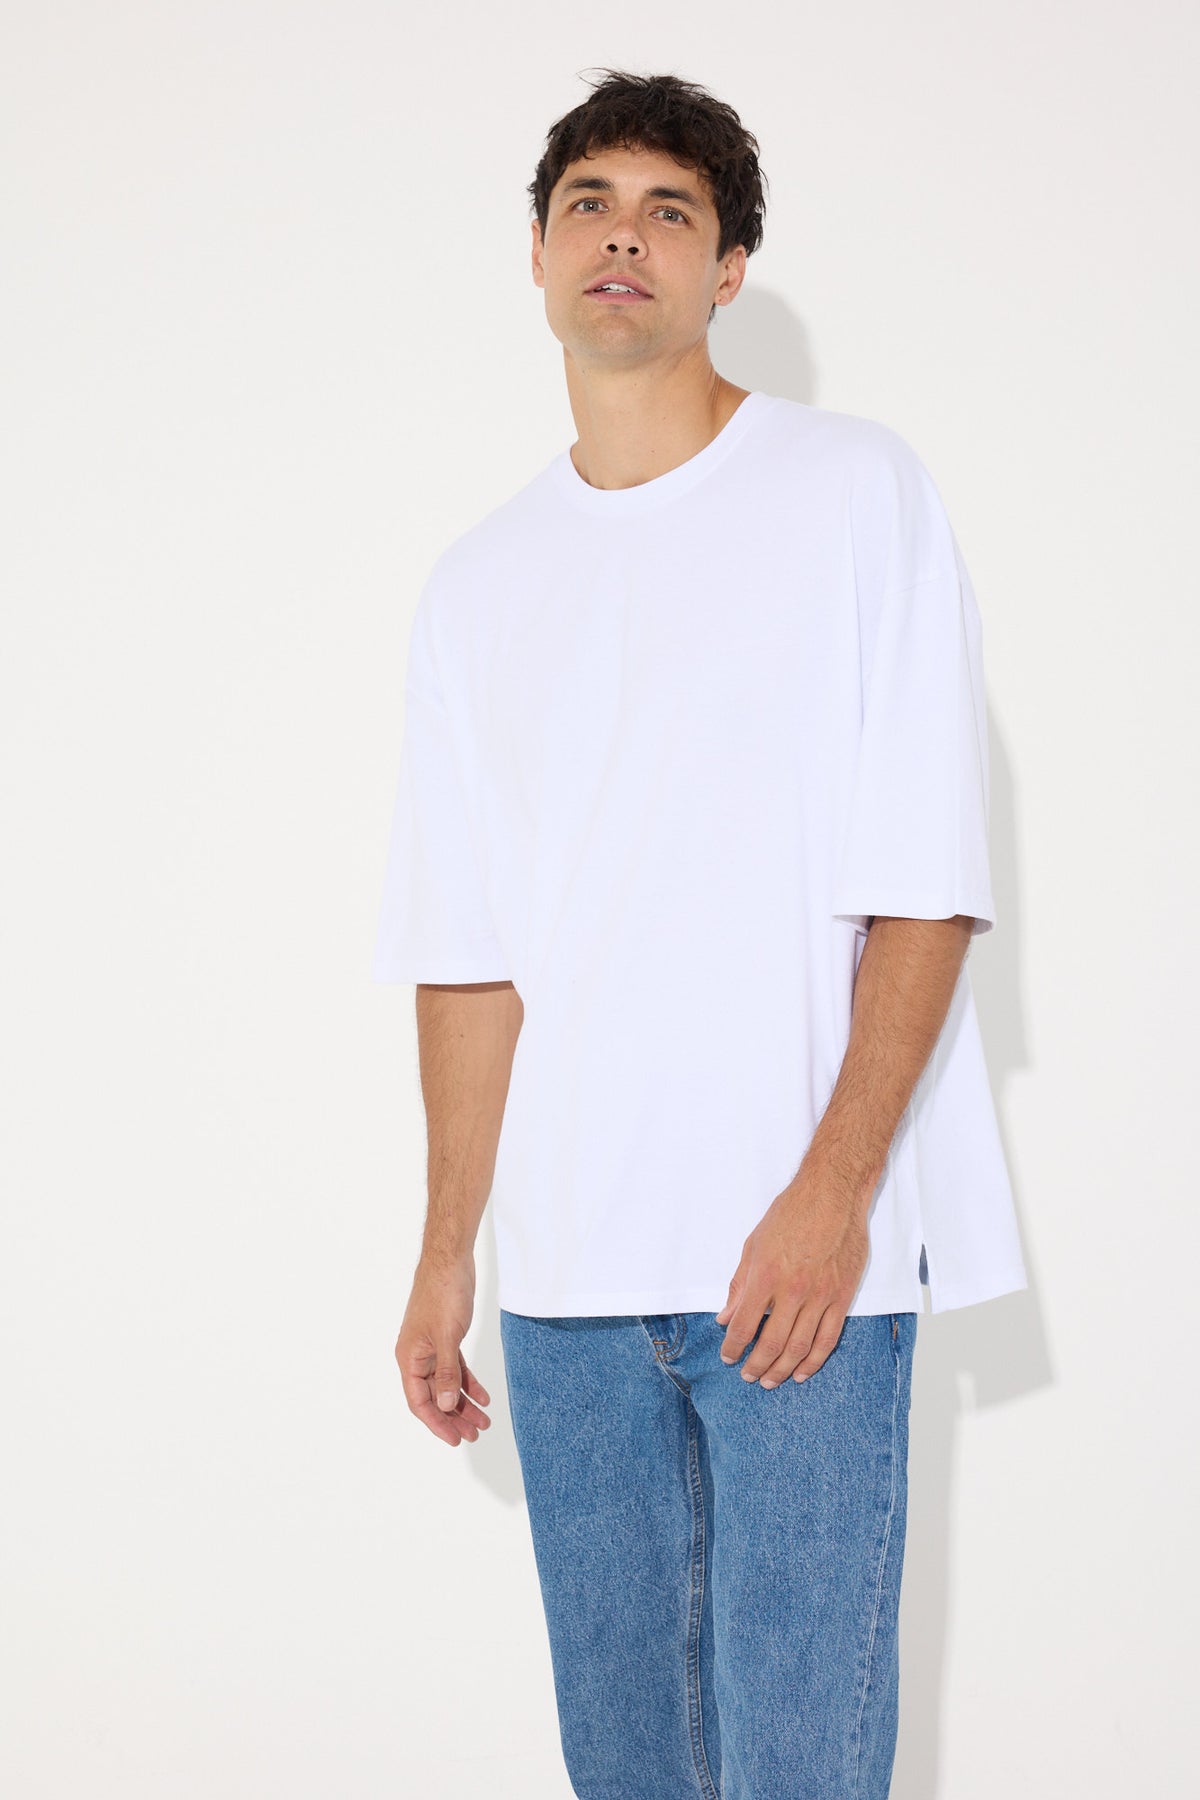 Tommy Tee Basic White - SALE